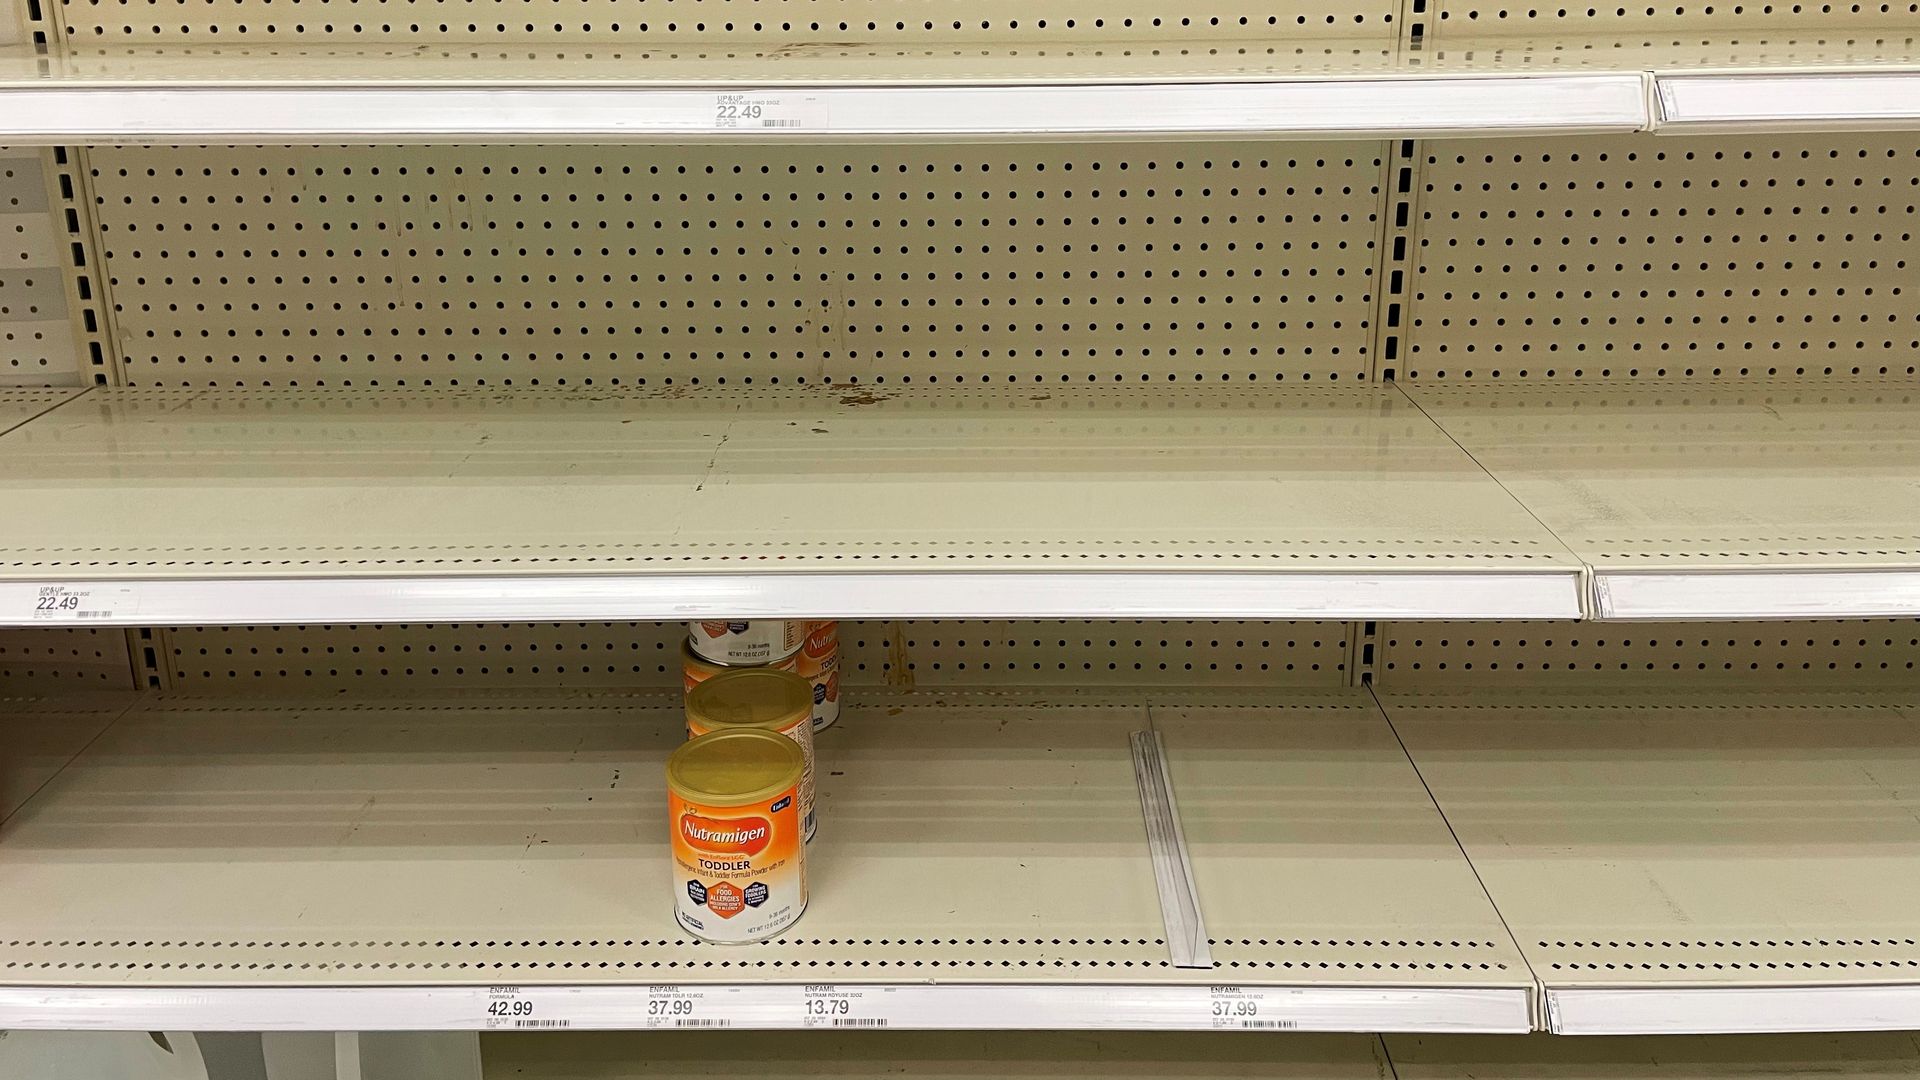  shelves of baby formula at a store in Virginia, the United States. 